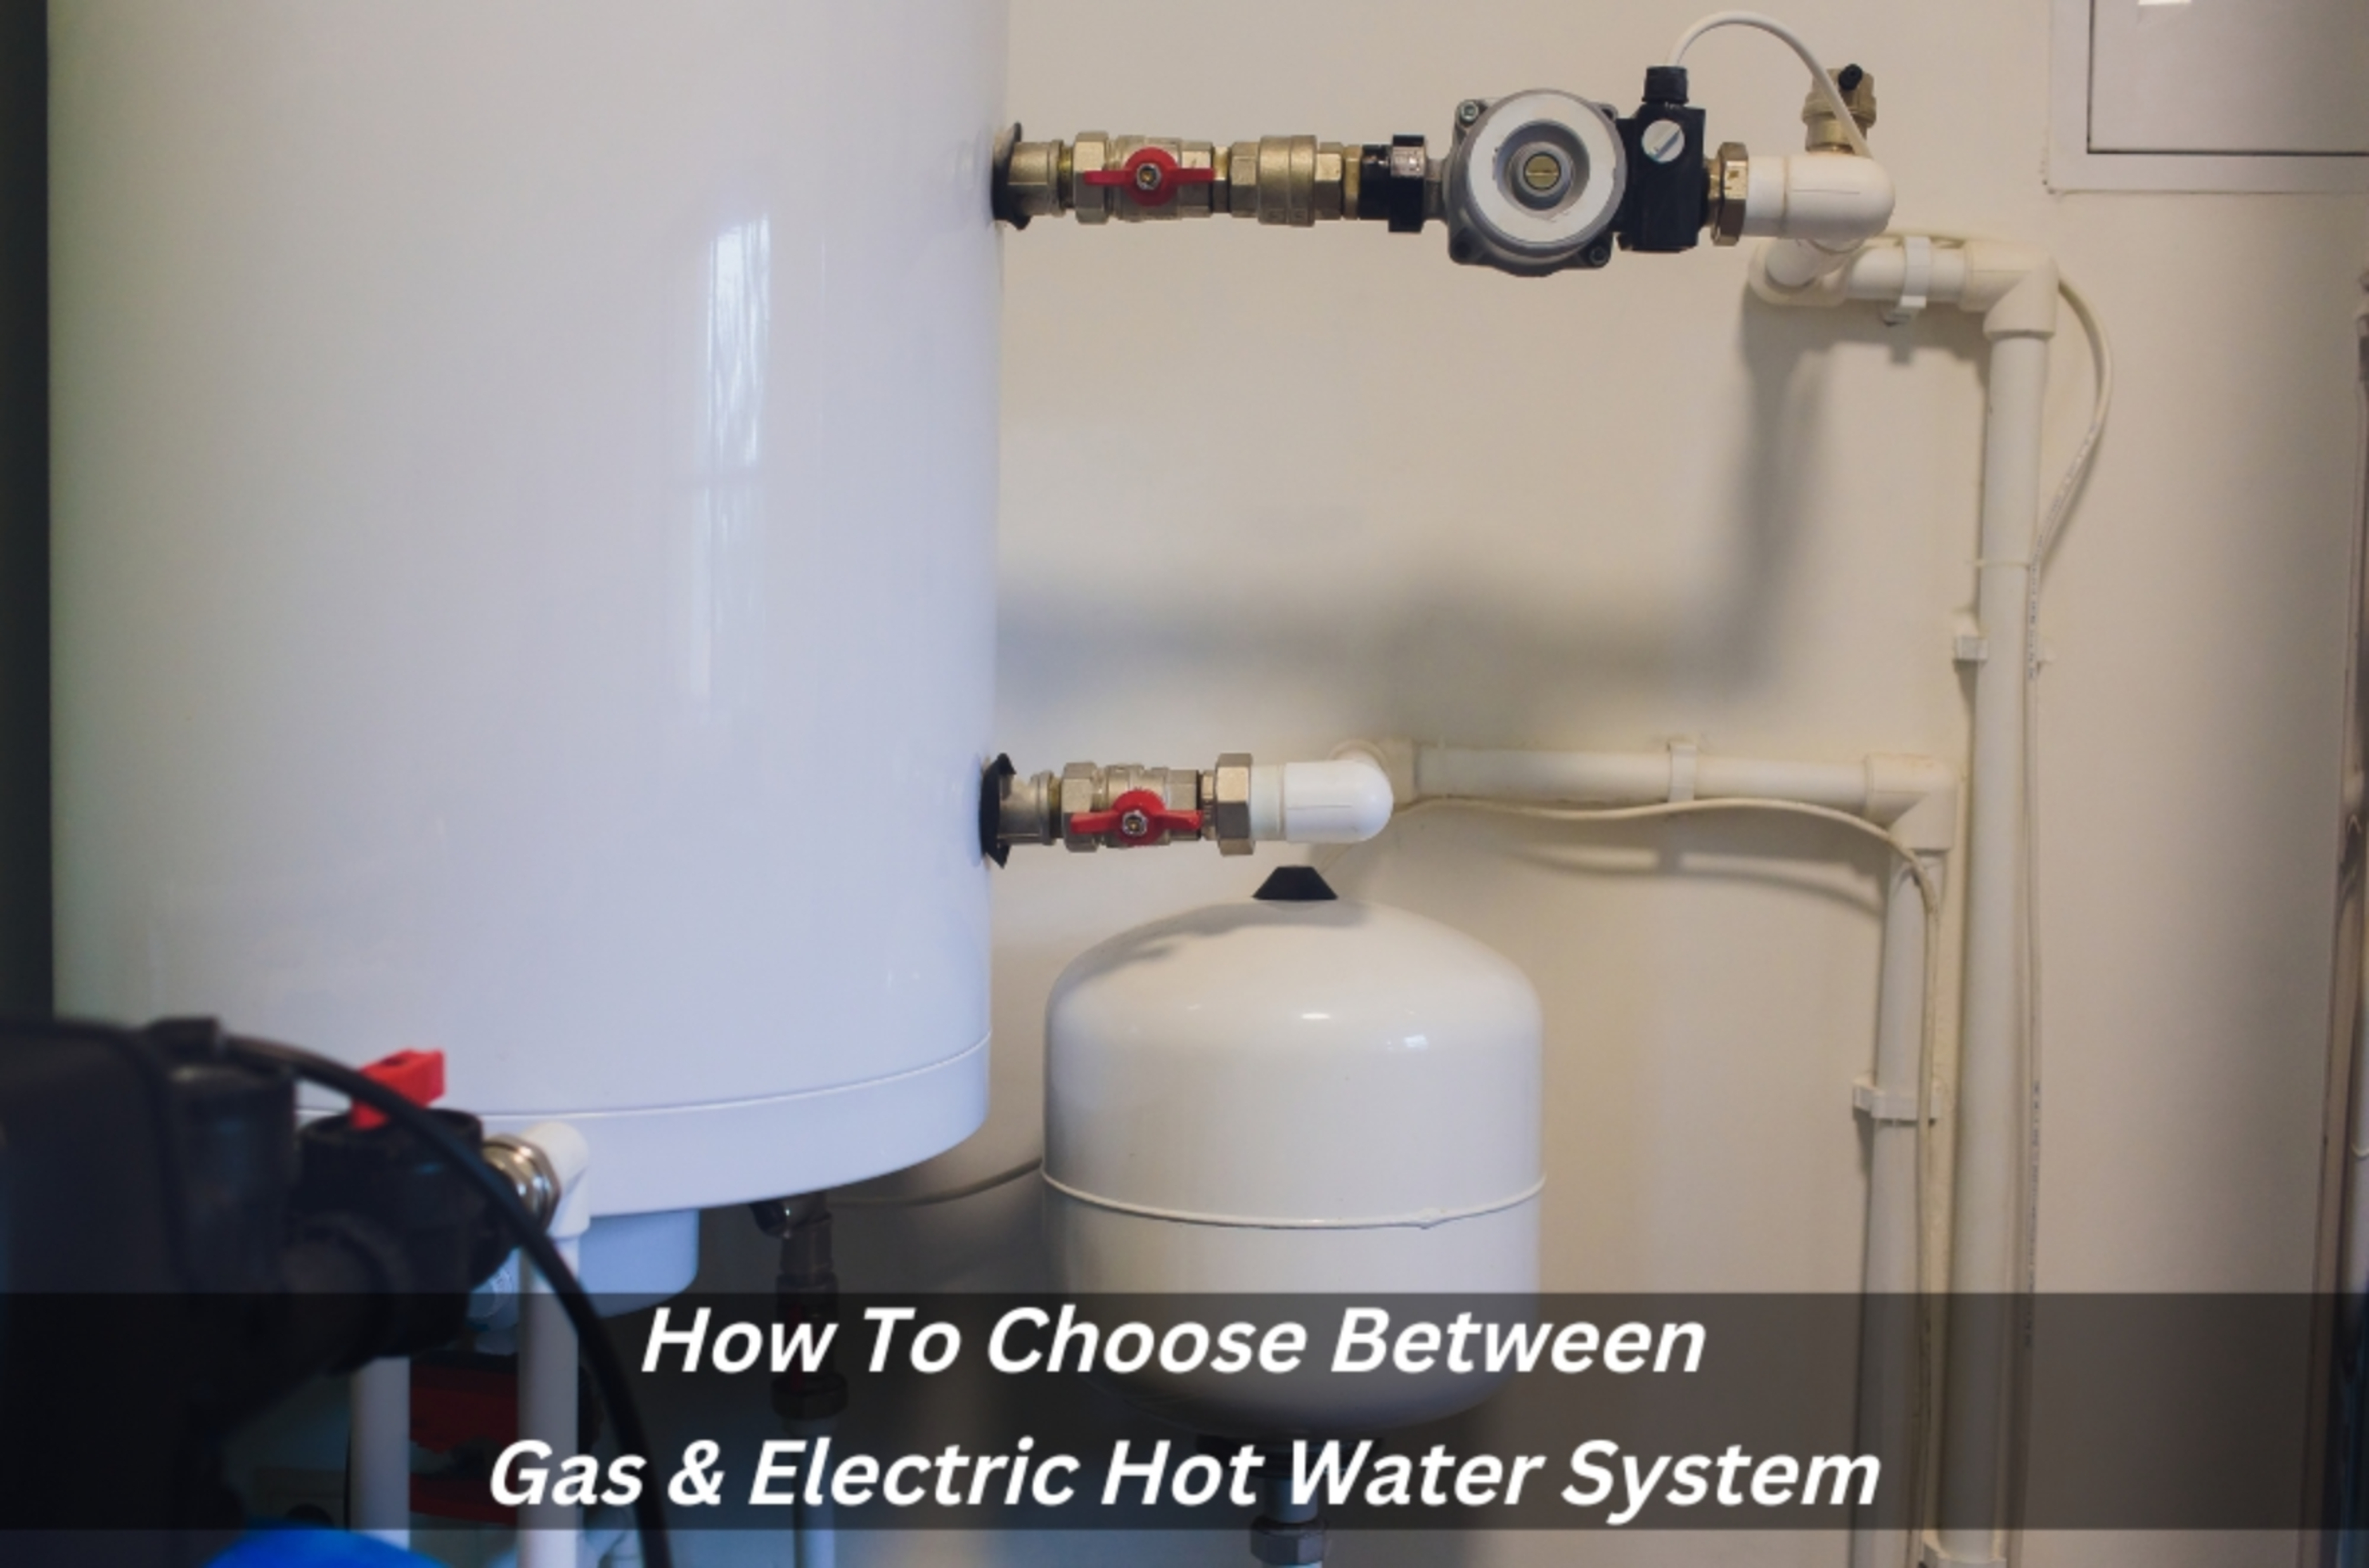 https://www.homeone.com.au/p/s/Sydney-Hot-Water-Systems-8288/images/article.4227.o.jpg